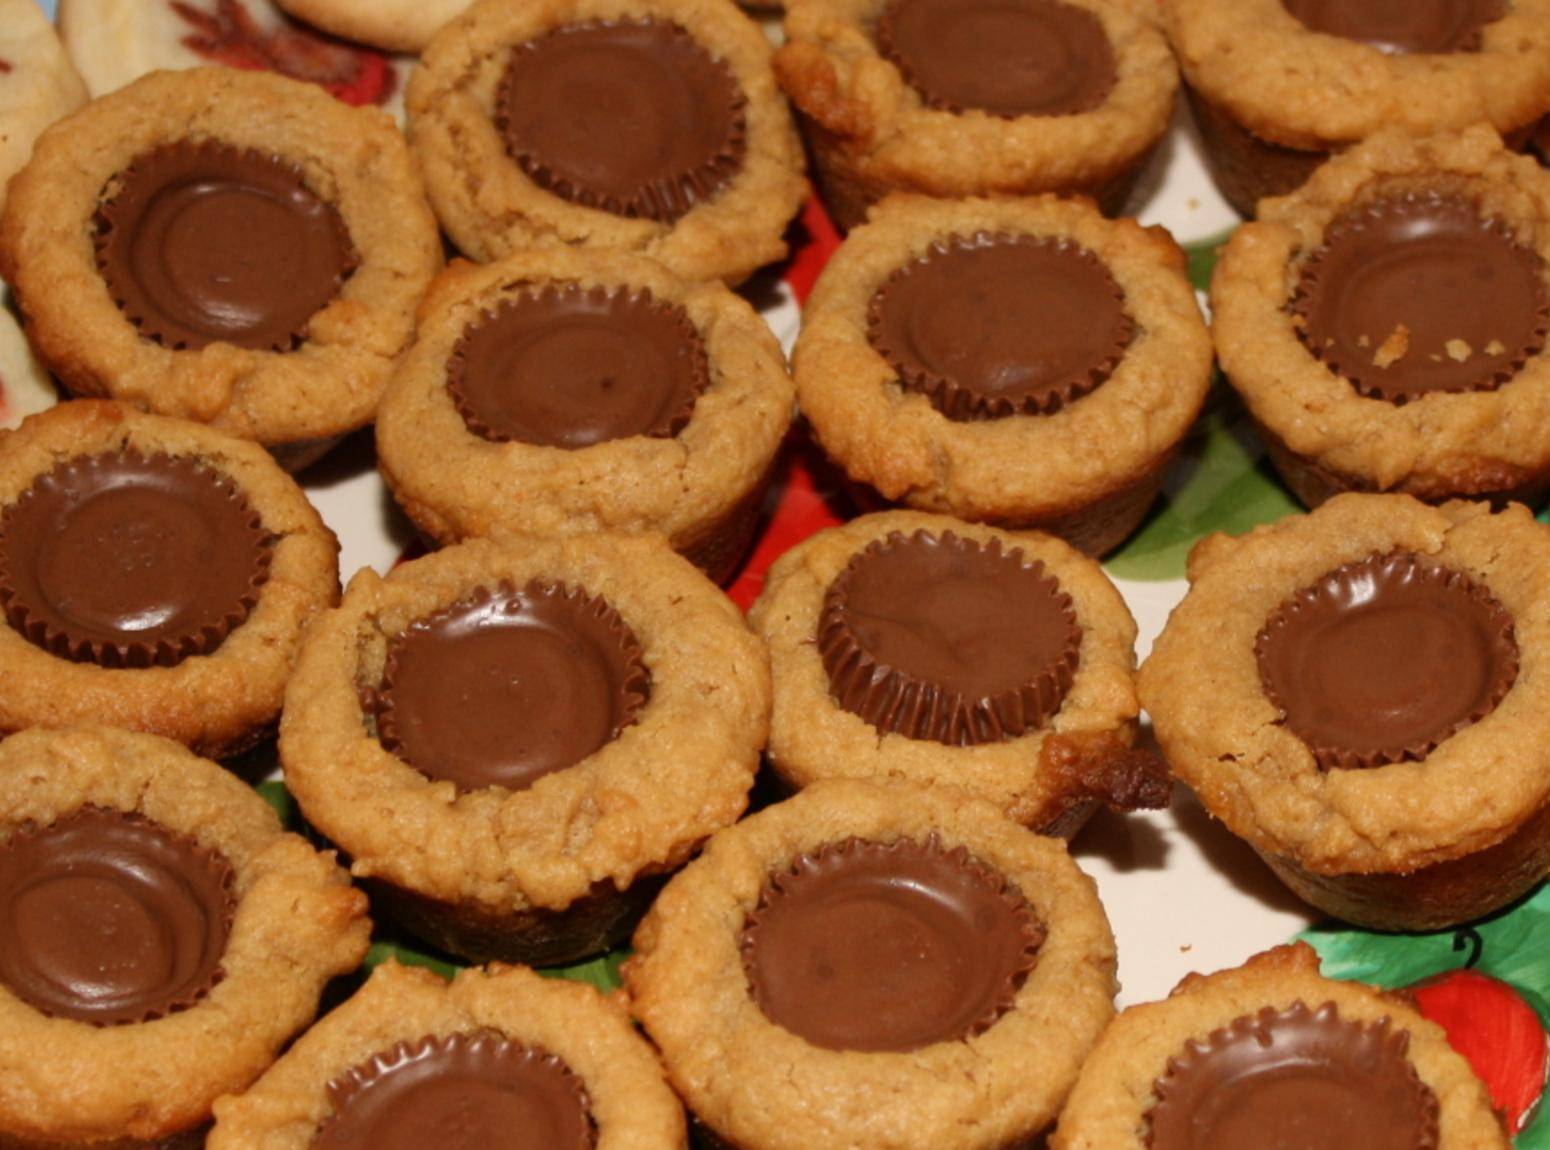 Reese Peanut Butter Cup Cookies Recipe
 Stormy s Reese s Peanut Butter Cup Cookies 2 Ingre nts